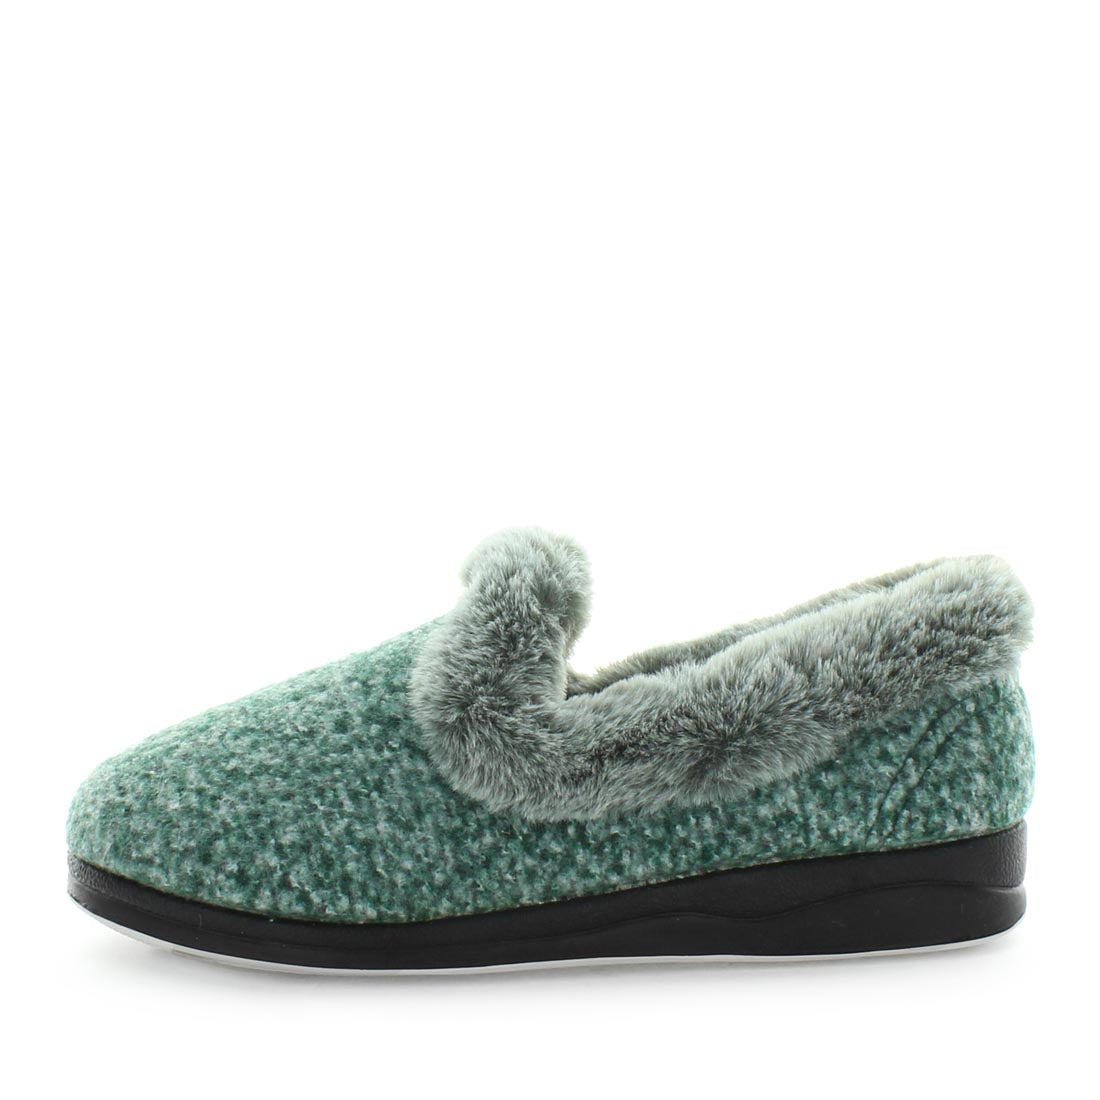 Classic womens slip on slipper, Emille by panda slippers. A green slipper made with soft materials and comfy fit design for the perfect indoor slipper. showing a non slip sole and micro terry trimming,